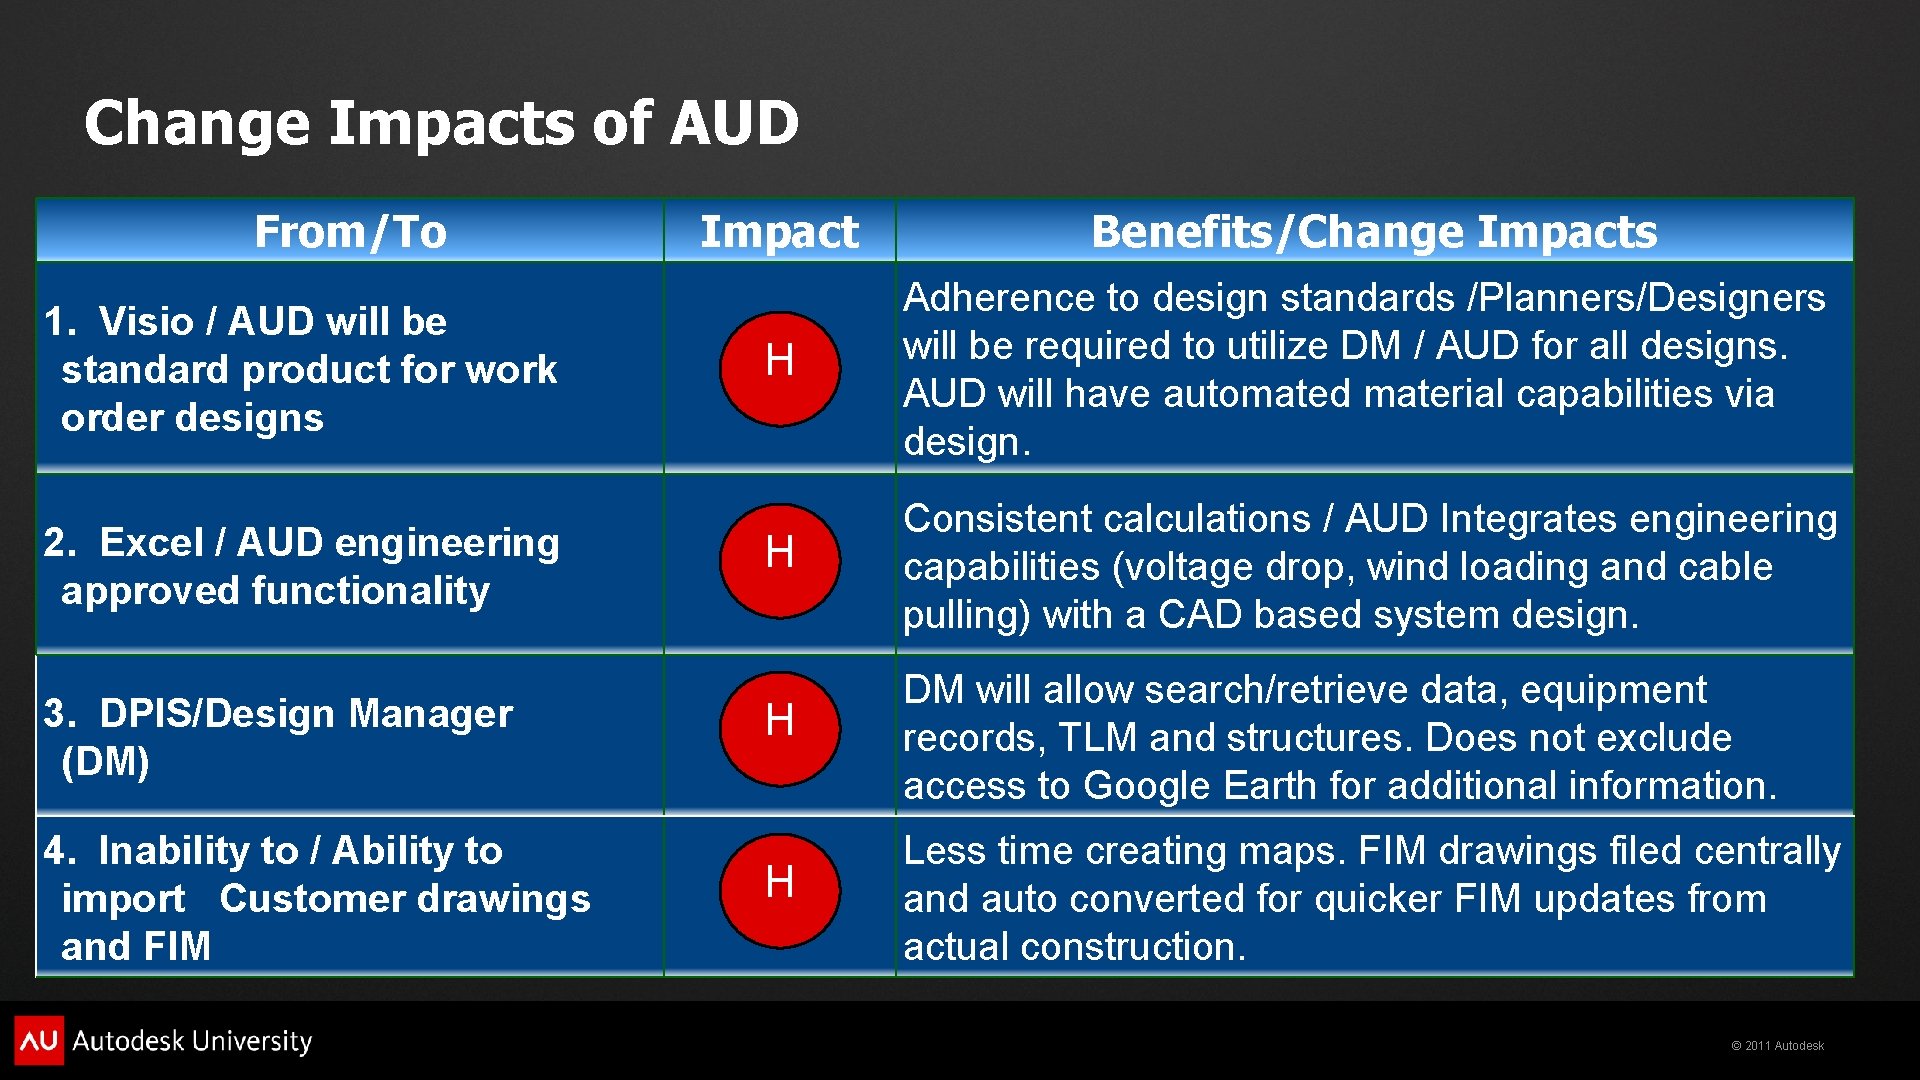 Change Impacts of AUD From/To 1. Visio / AUD will be standard product for